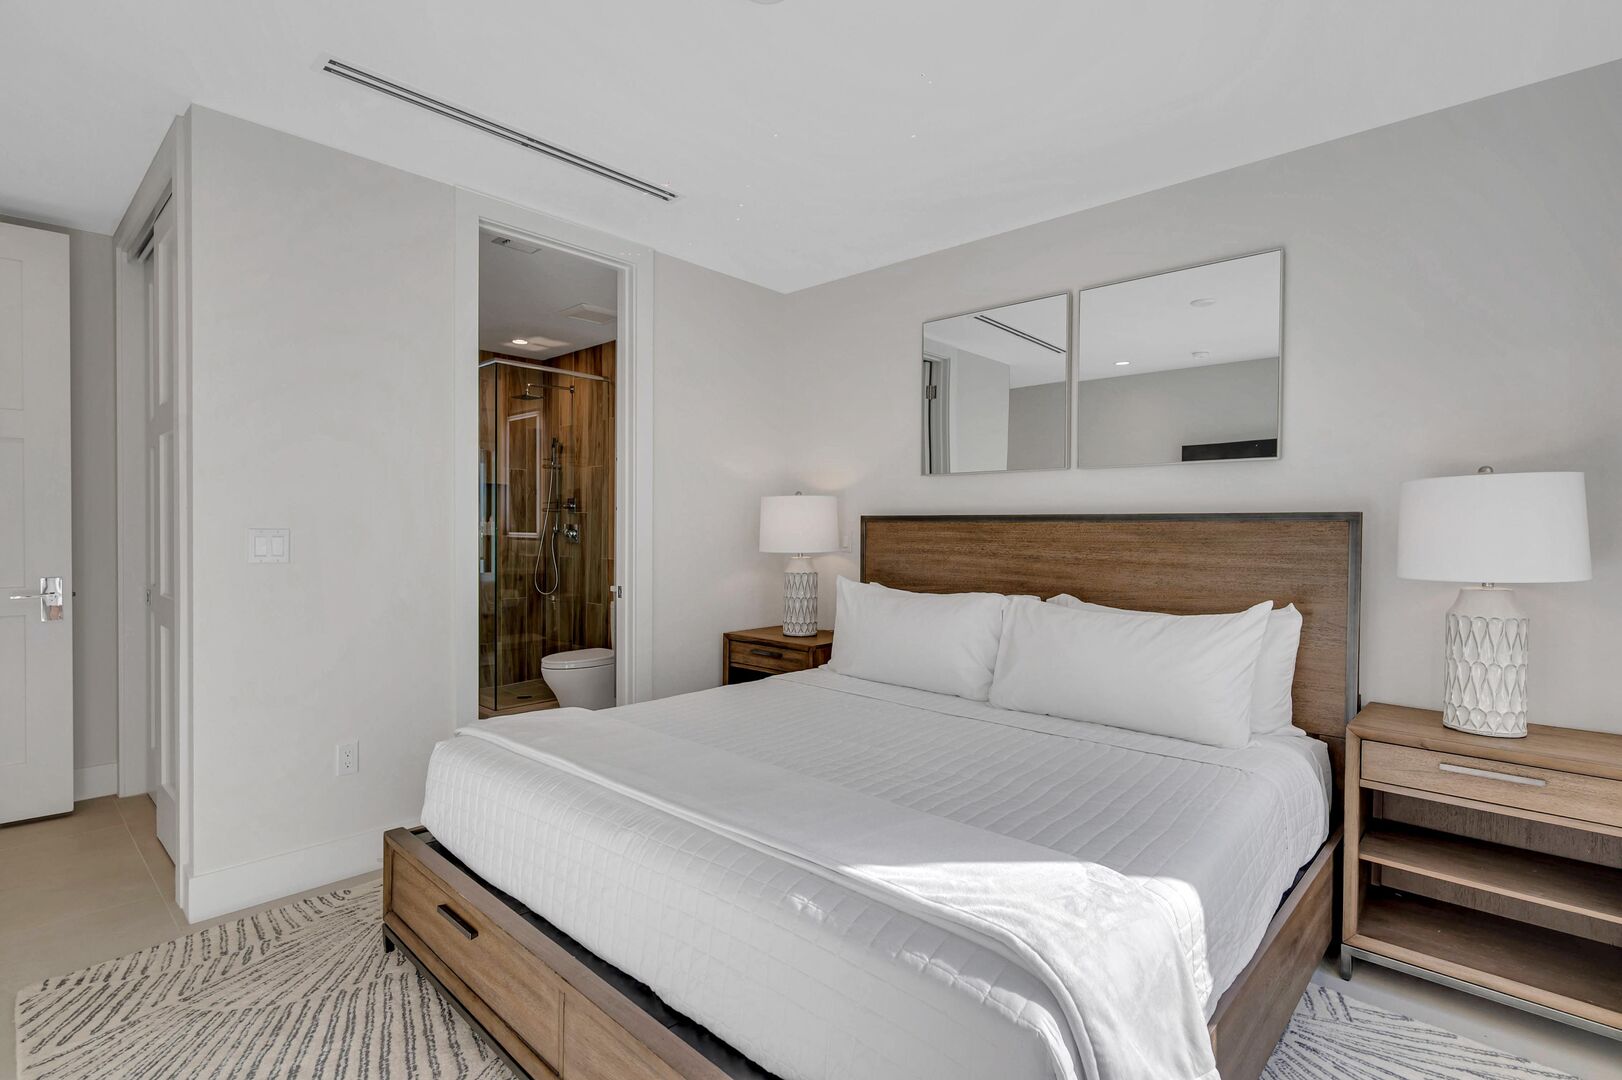 Bedroom Six is located on the first floor, features a king size bed and a jack-and-jill bathroom with bedroom four.